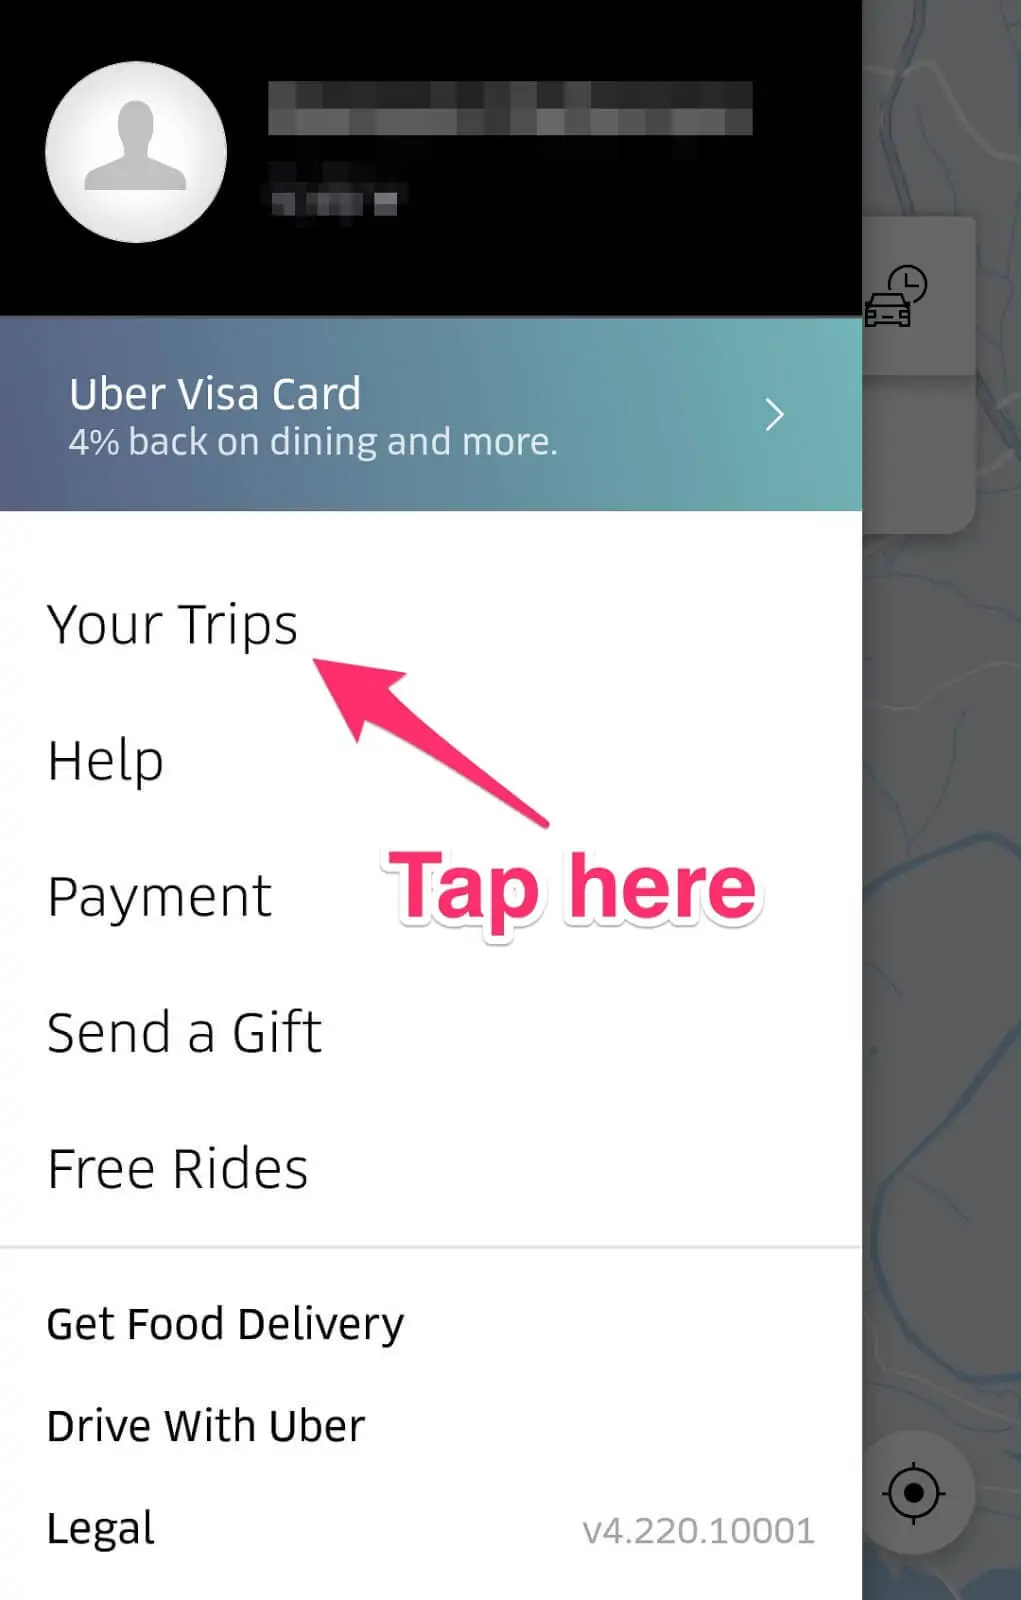 How to Report Uber and Lyft Drivers and Dispute Uber and Lyft Charges: Step 2